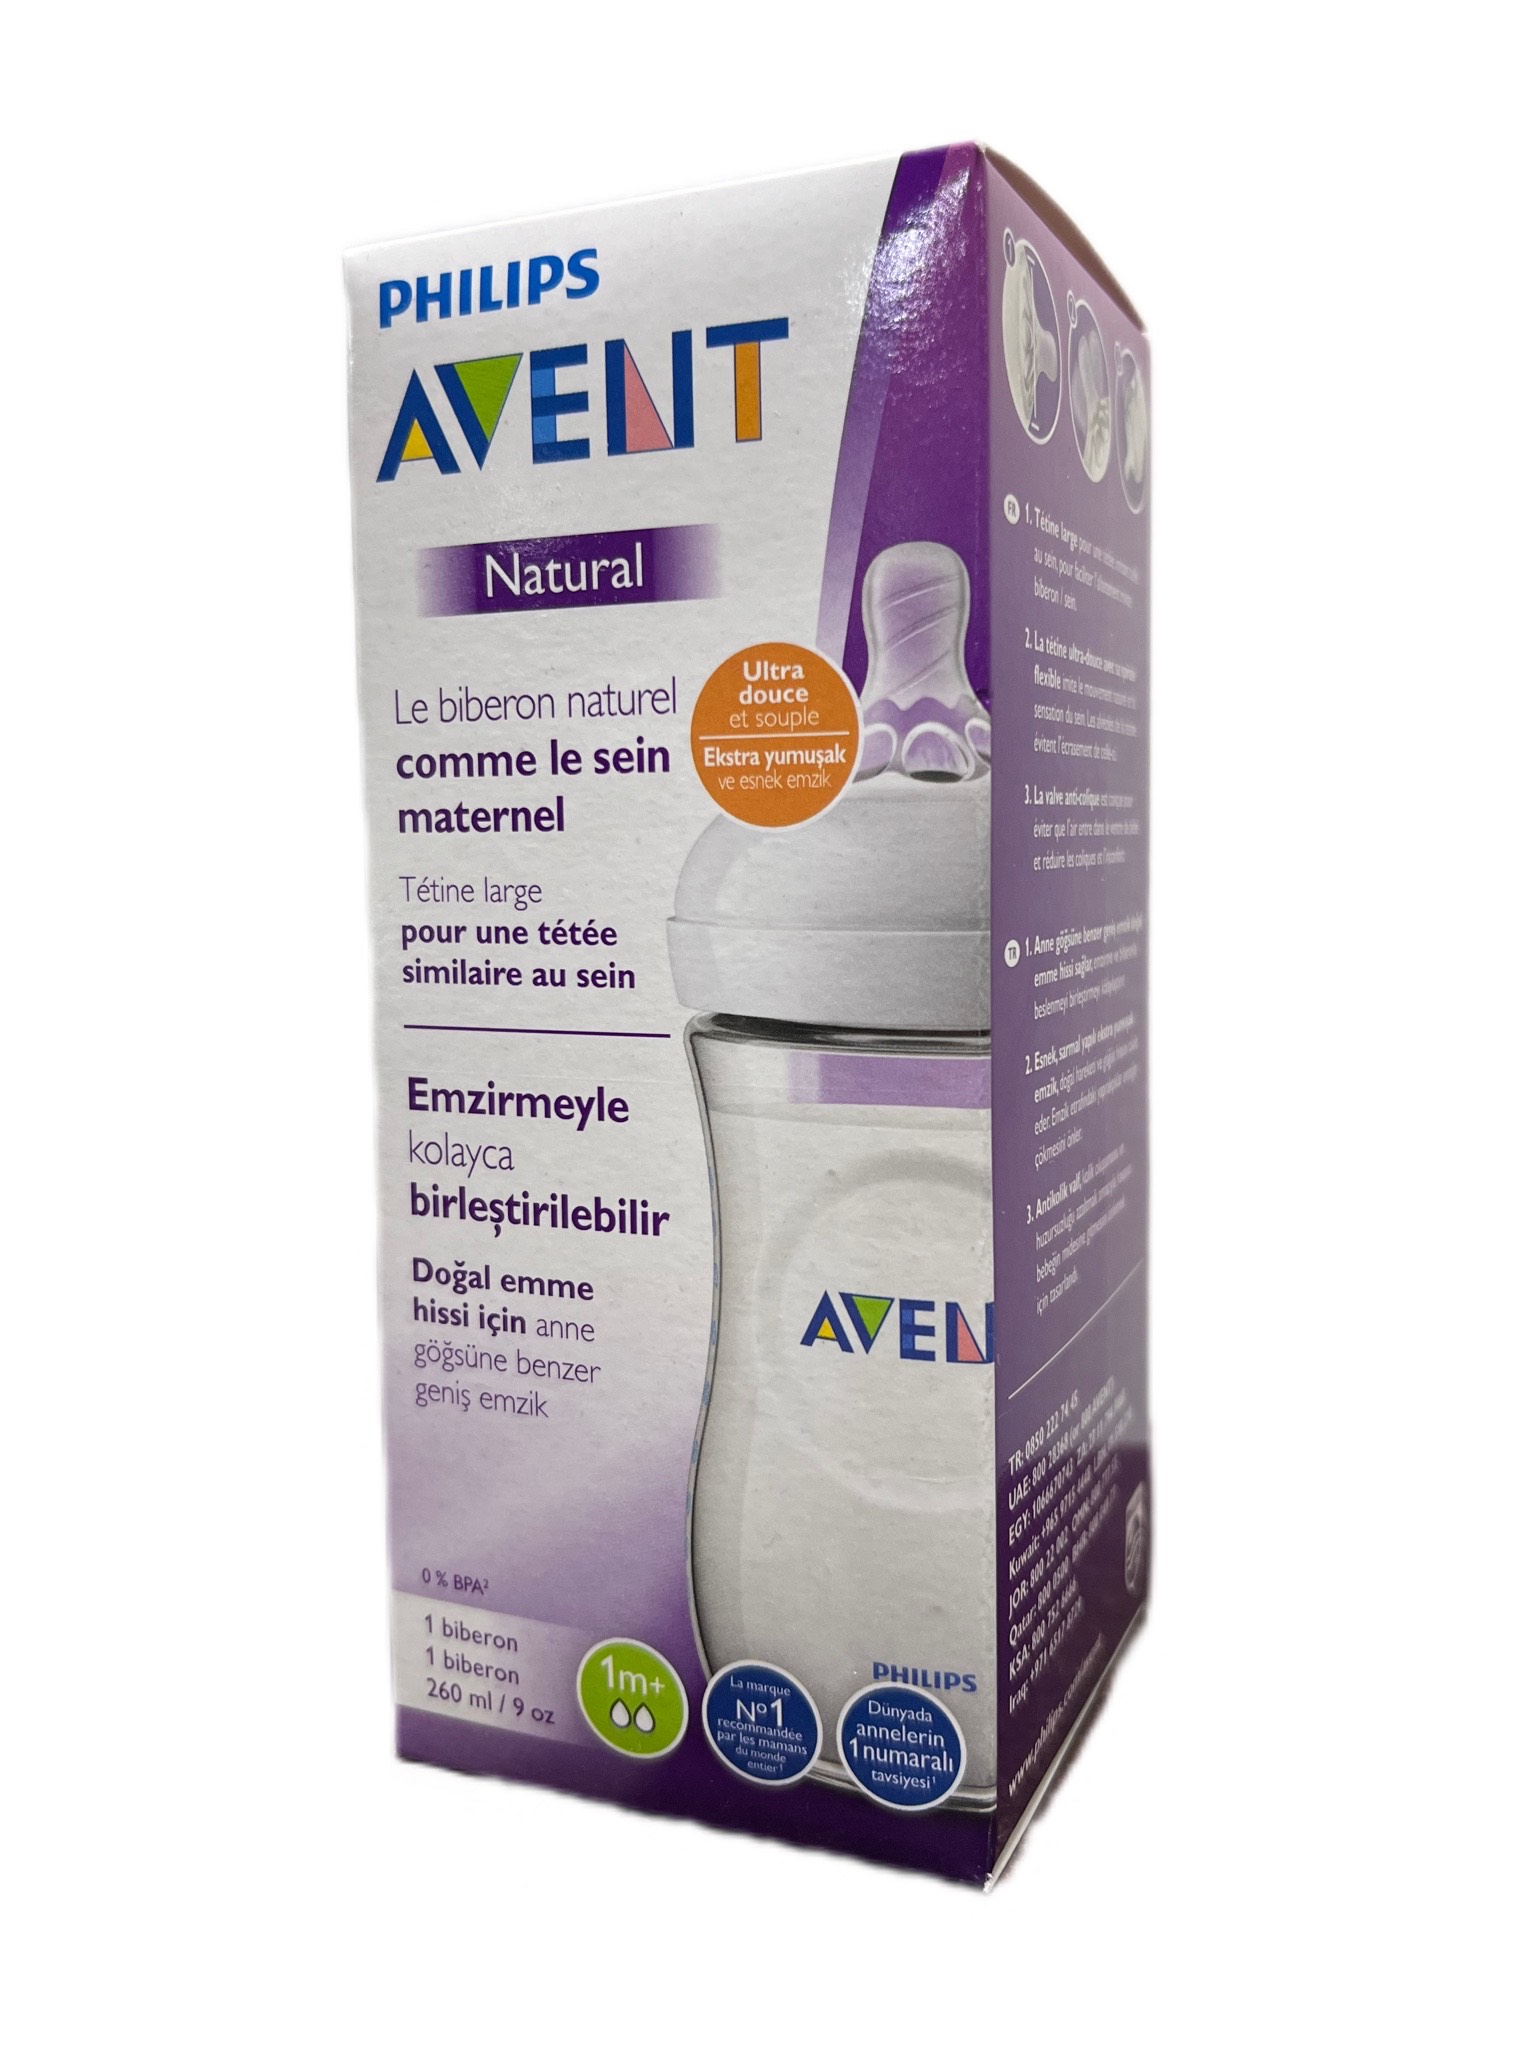 AVENT TASSE A PAILLE COURBEE 200ml - Parales3a